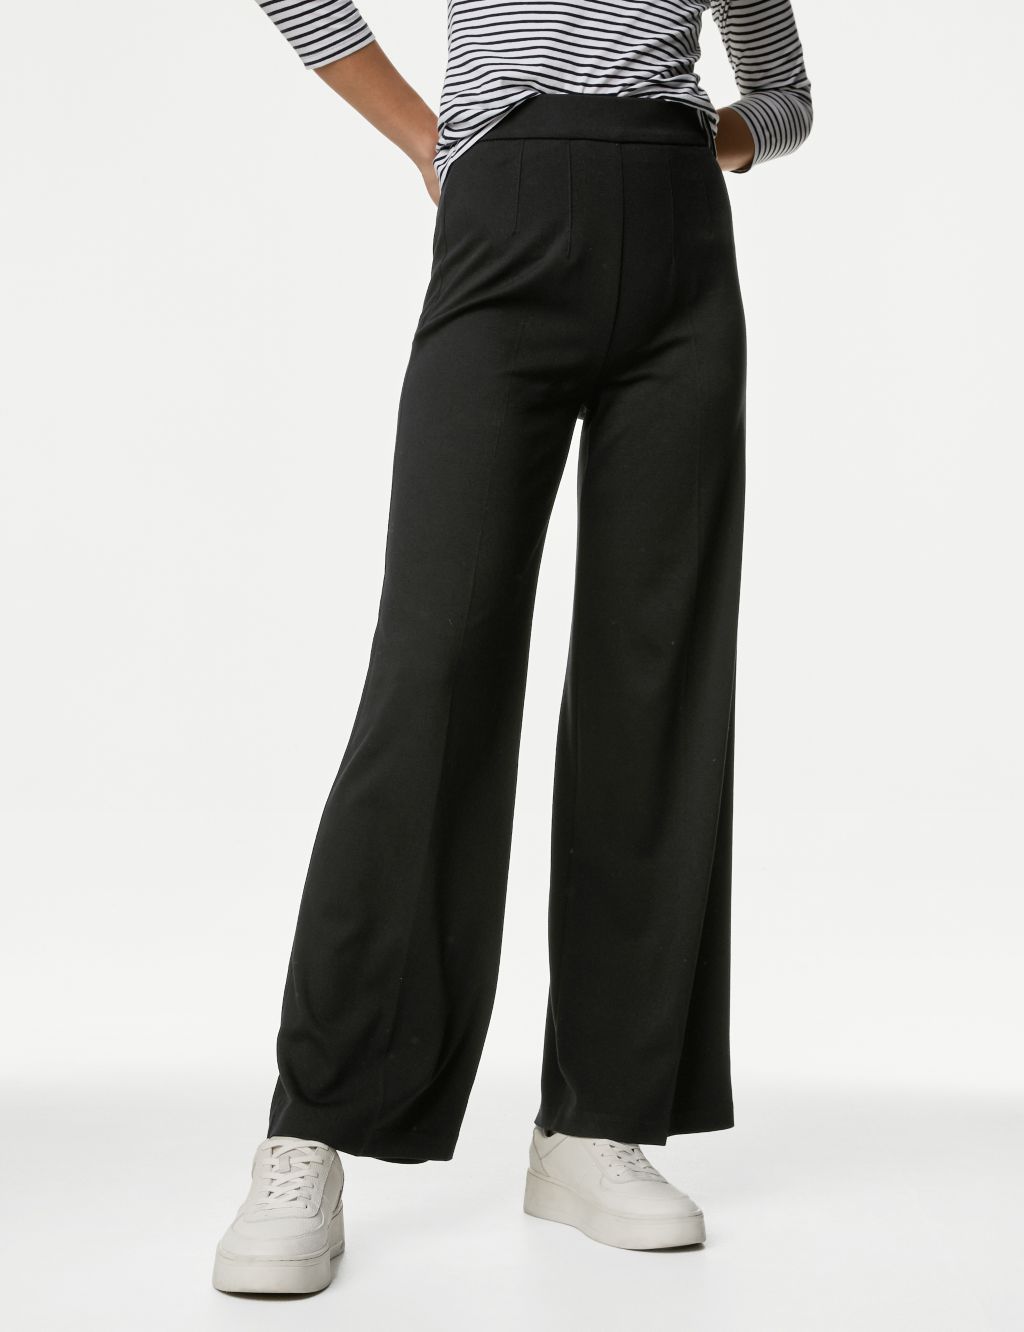 These 'extremely comfortable' M&S jersey trousers have over 500